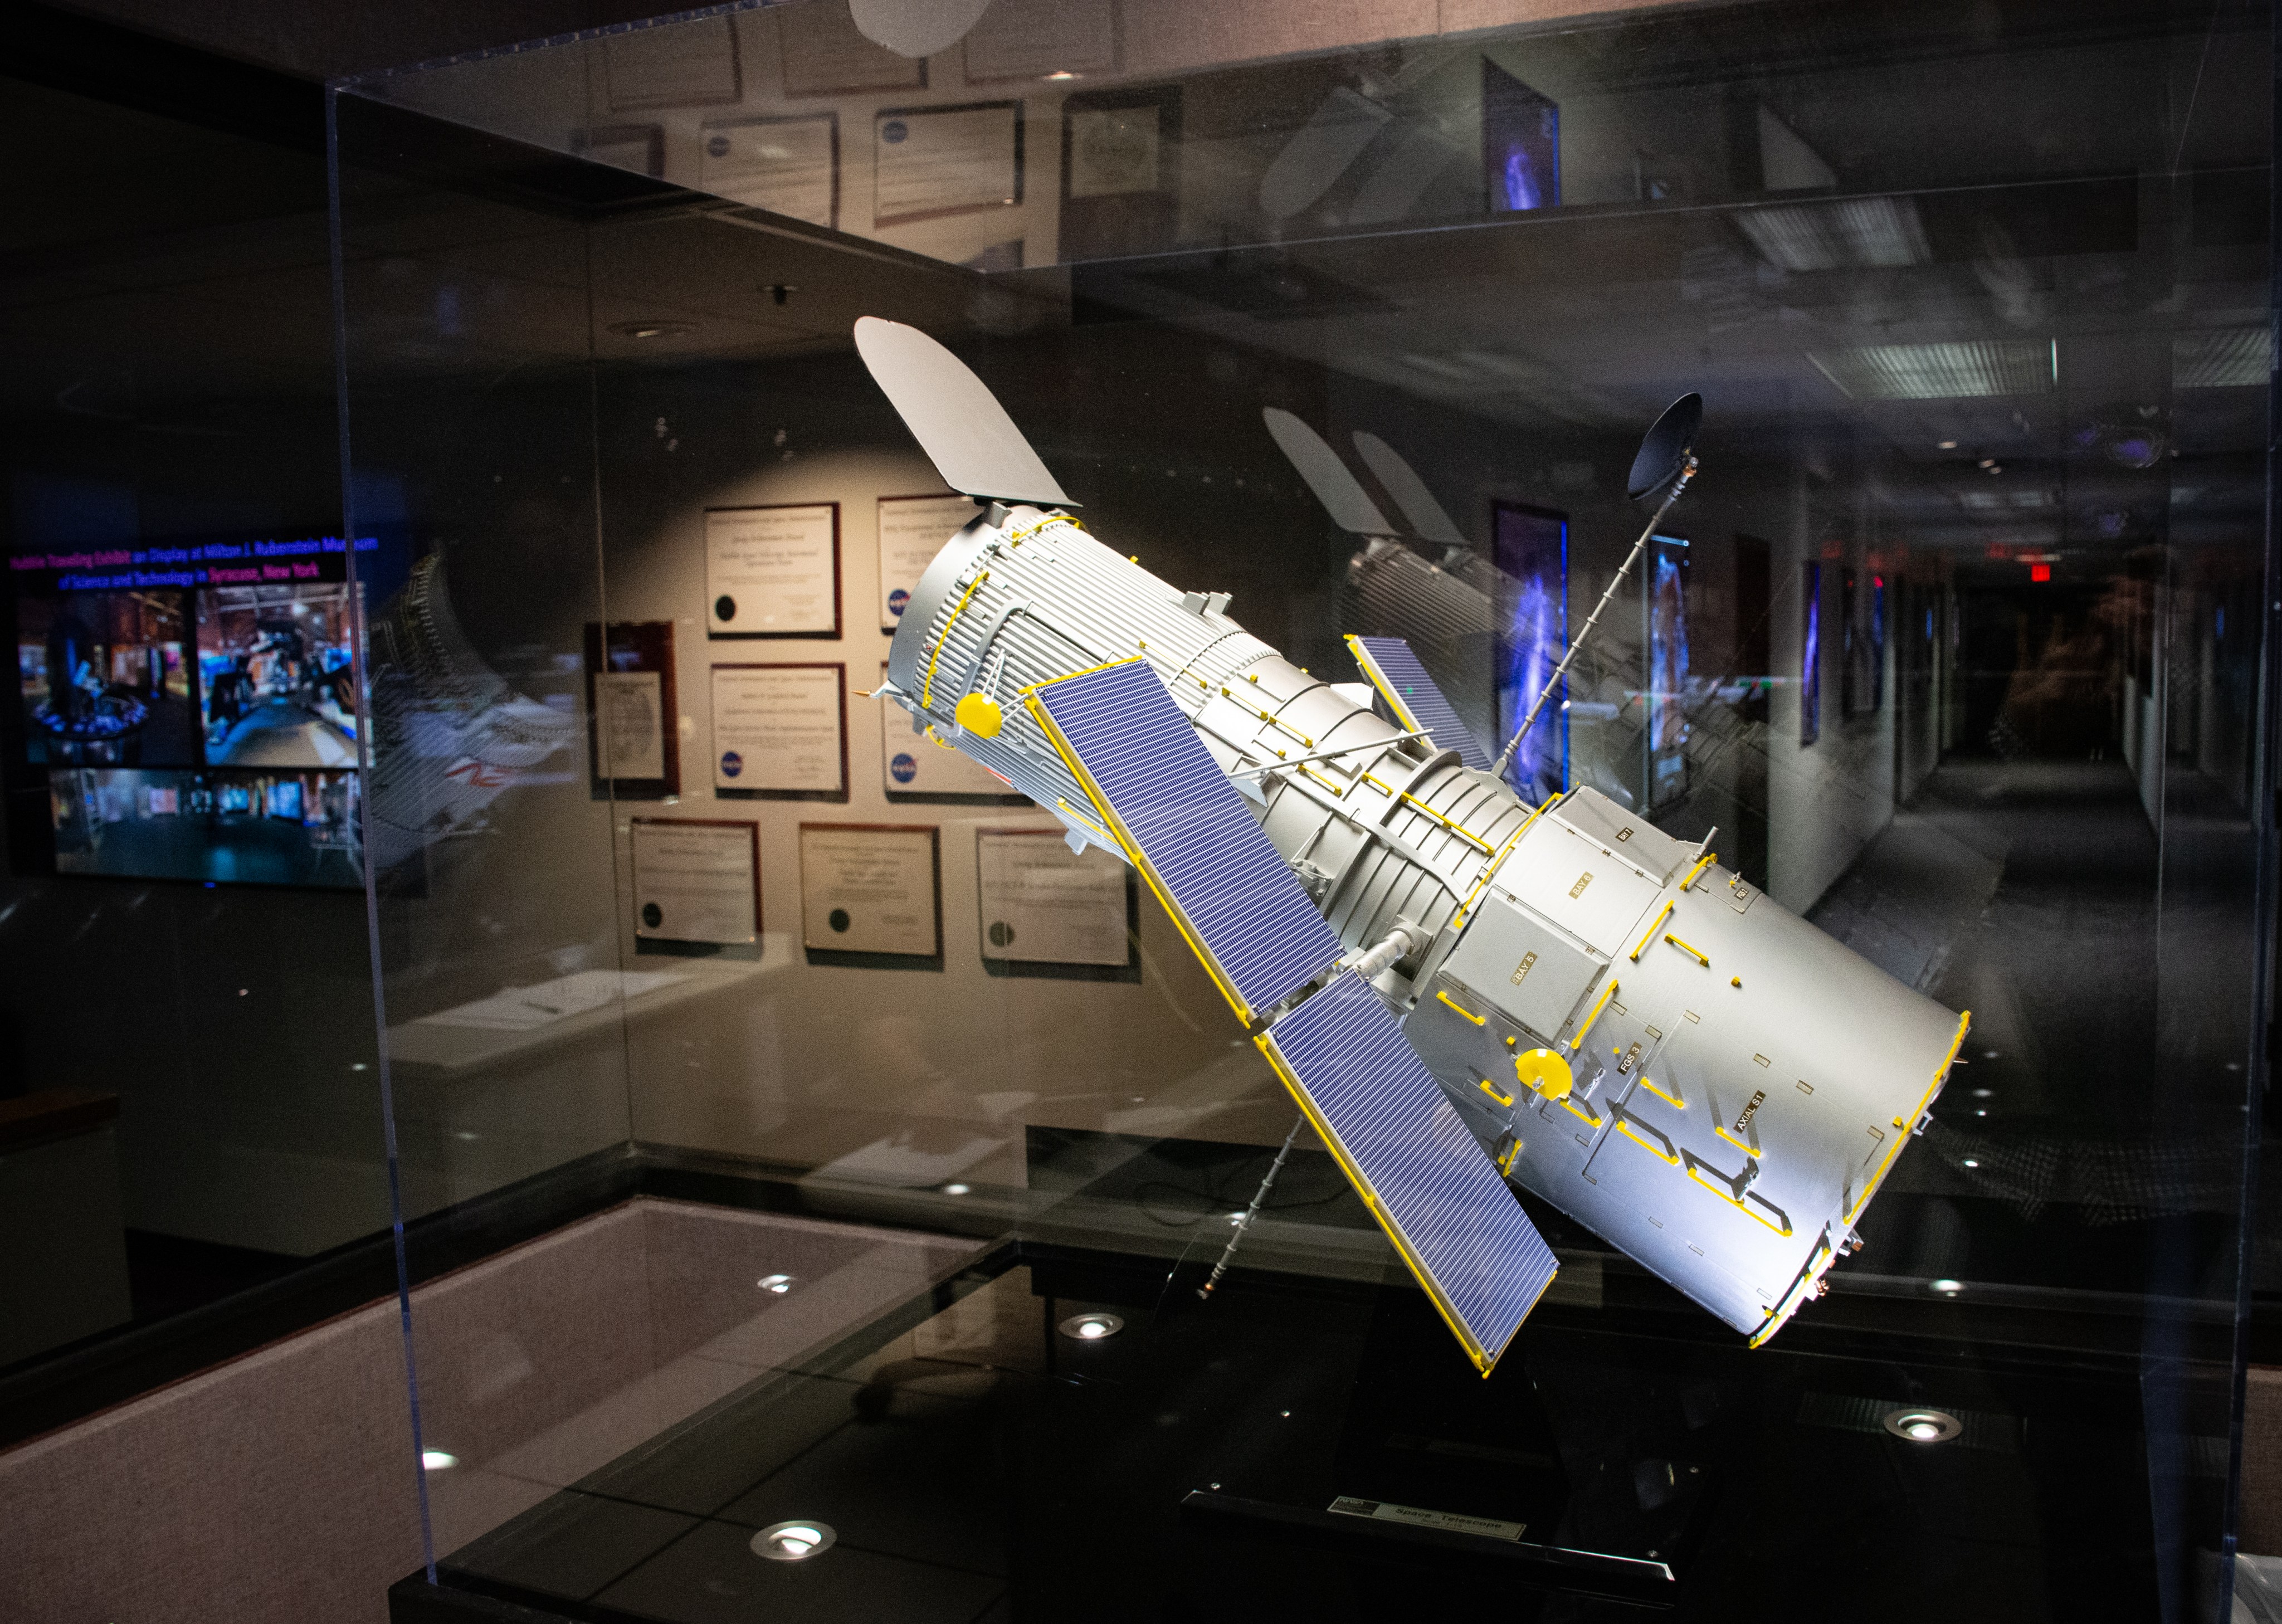 A model of the Hubble Space Telescope in the control center